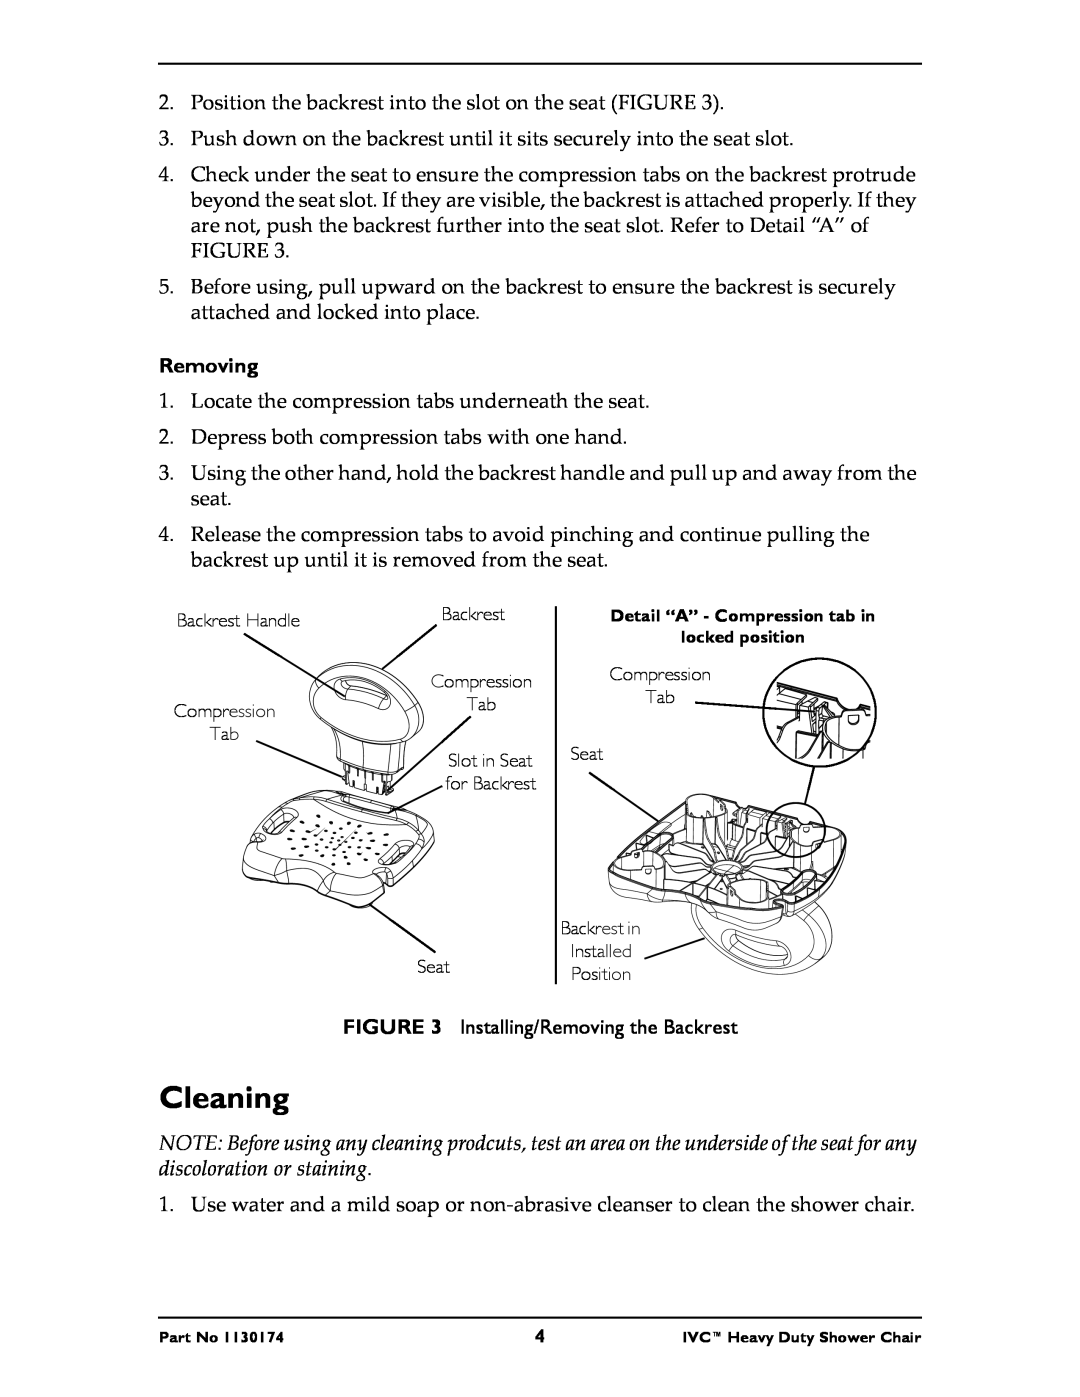 Invacare 9780E, 9781E instruction sheet Cleaning, Removing 